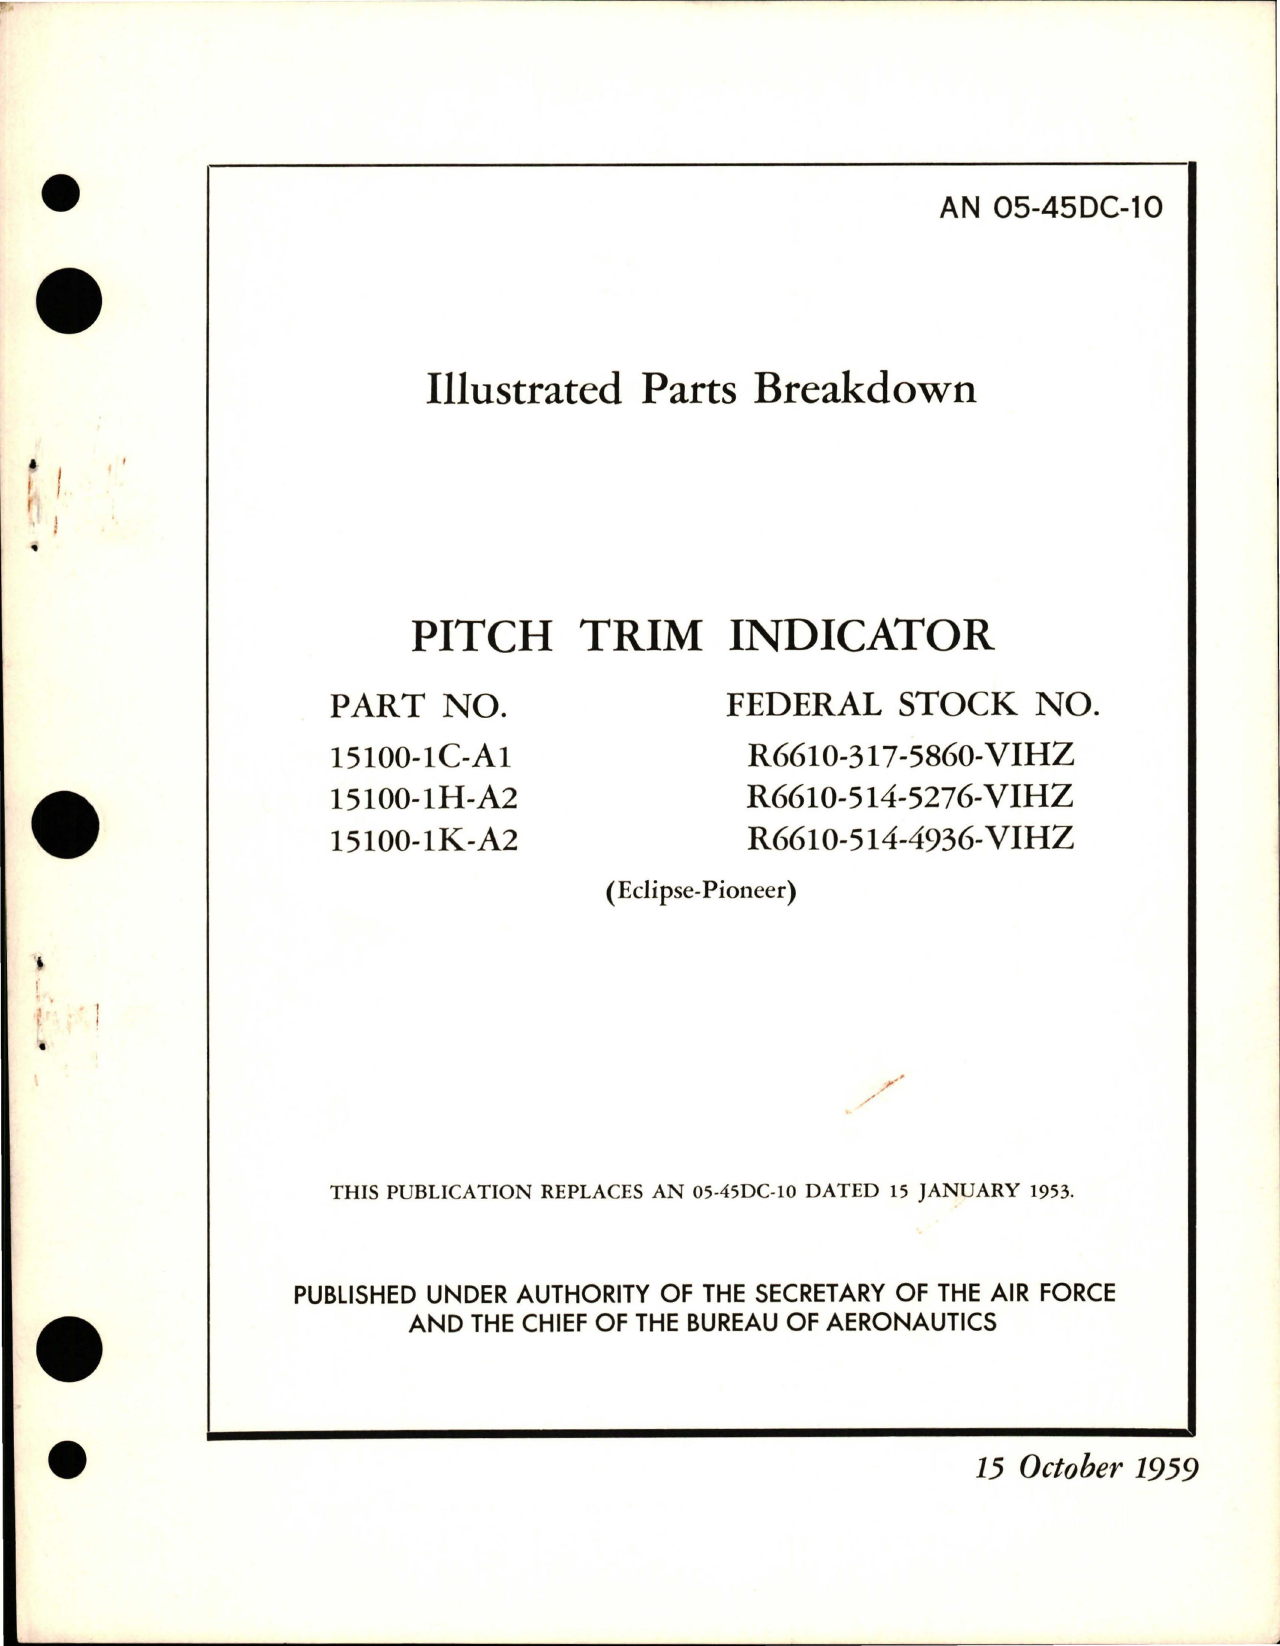 Sample page 1 from AirCorps Library document: Illustrated Parts Breakdown for Pitch Trim Indicator - Parts 15100-1C-A1, 15100-1H-A2, and 15100-1K-A2